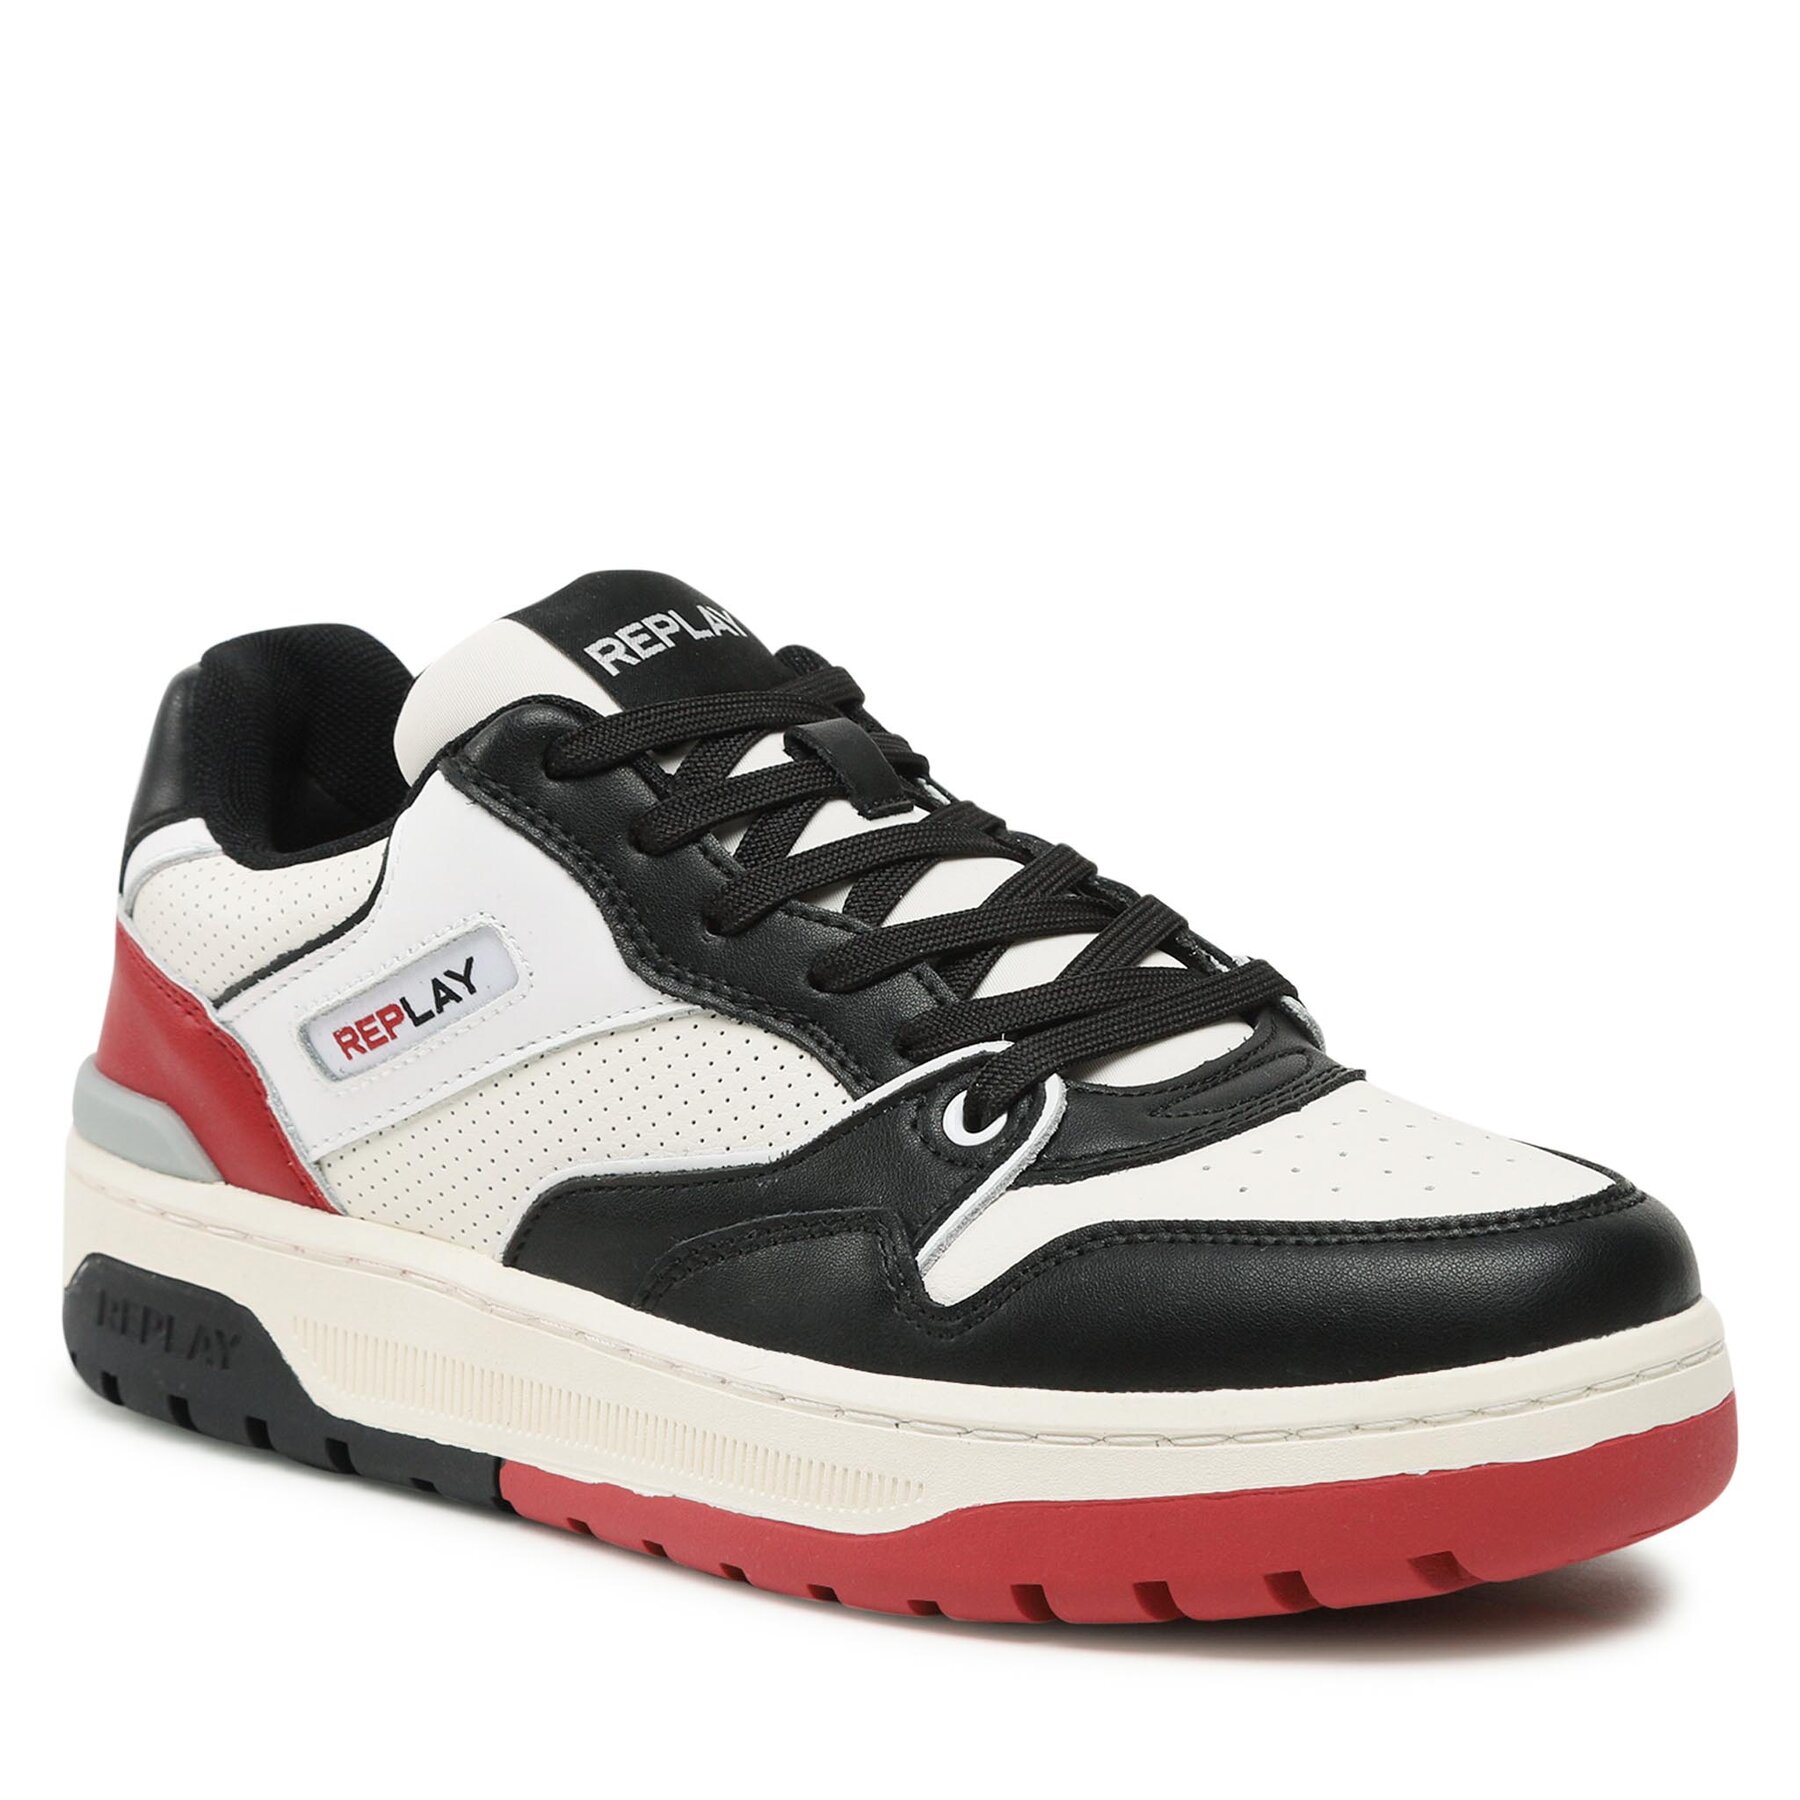 Sneakers Replay Gemini Perforated GMZ4S.000.C0002L Black/Off Wht/Red 3182